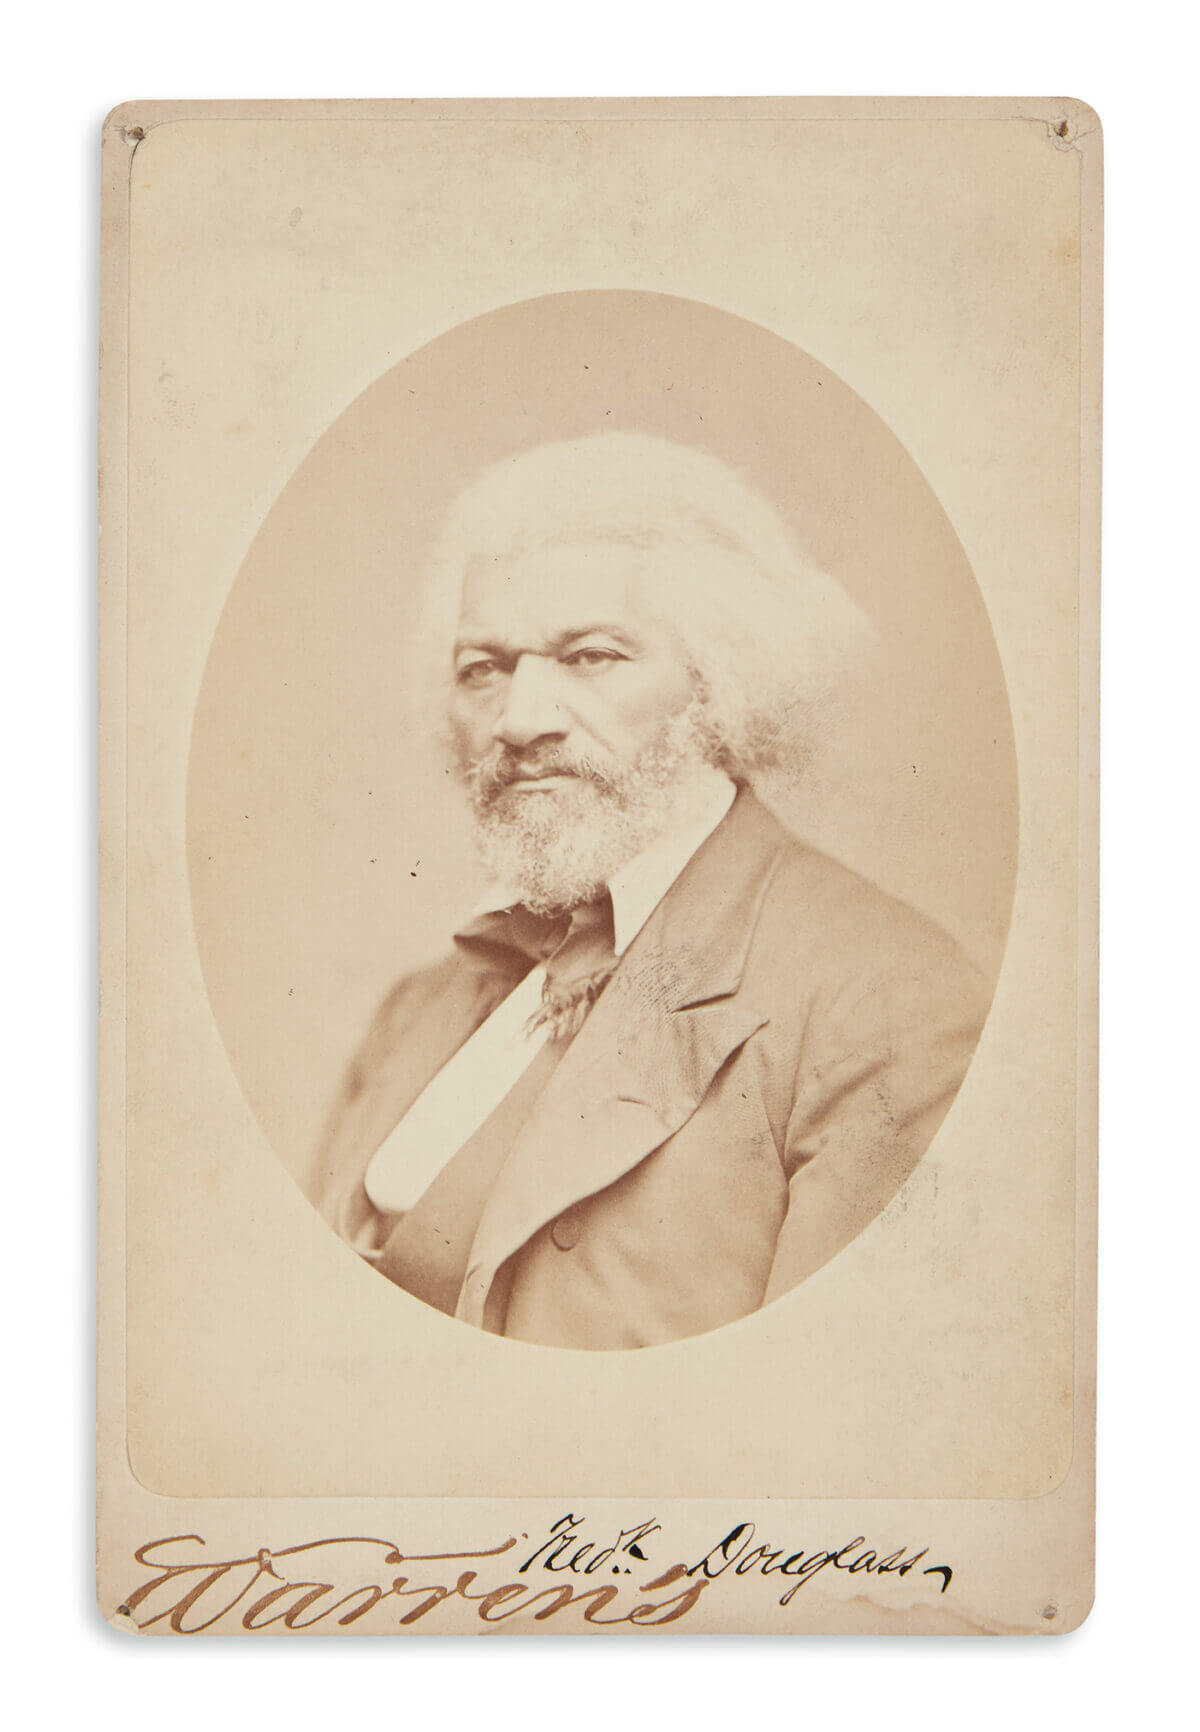 Photographs Shine at Swann Galleries’ African Americana Auction  New Record for a Signed Photograph of Frederick Douglass at $30k